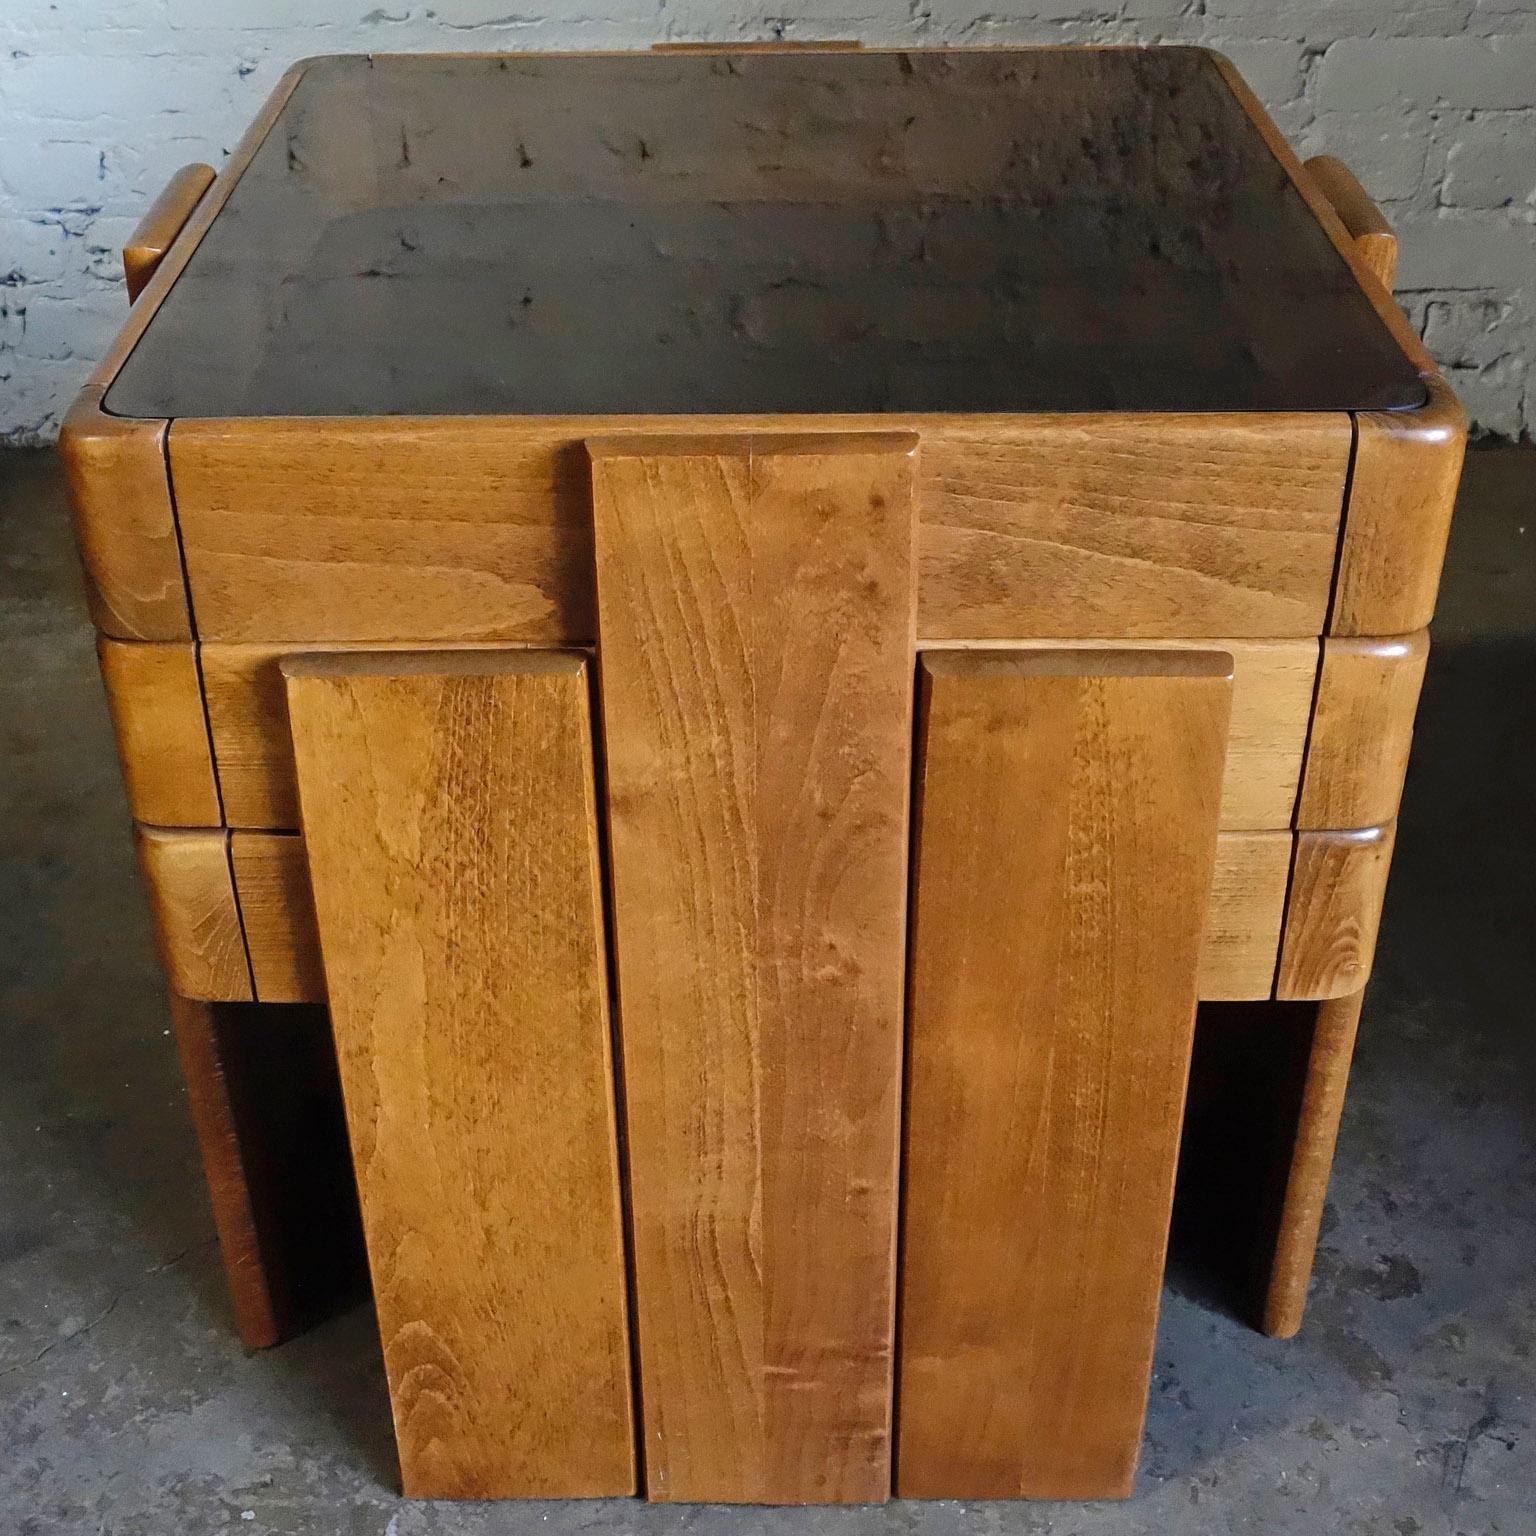 Versatile and stylish nesting tables with a wood frame and inset smoked glass. I have seen these used as graduating coffee tables, side tables, and end tables. 

Largest table is 20' cubed.